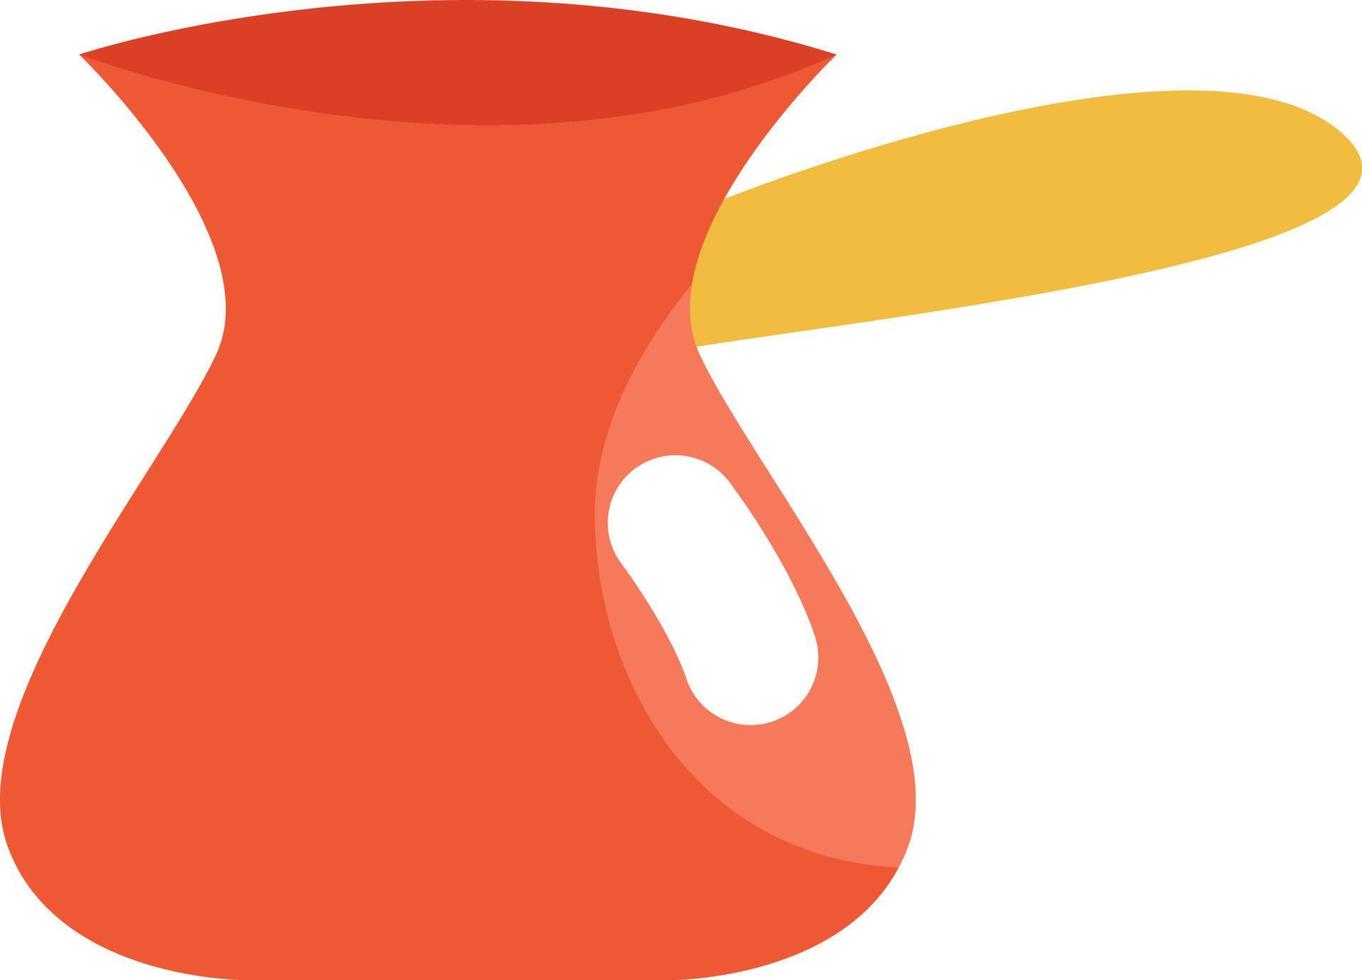 Cooking coffee pot, icon, vector on white background.